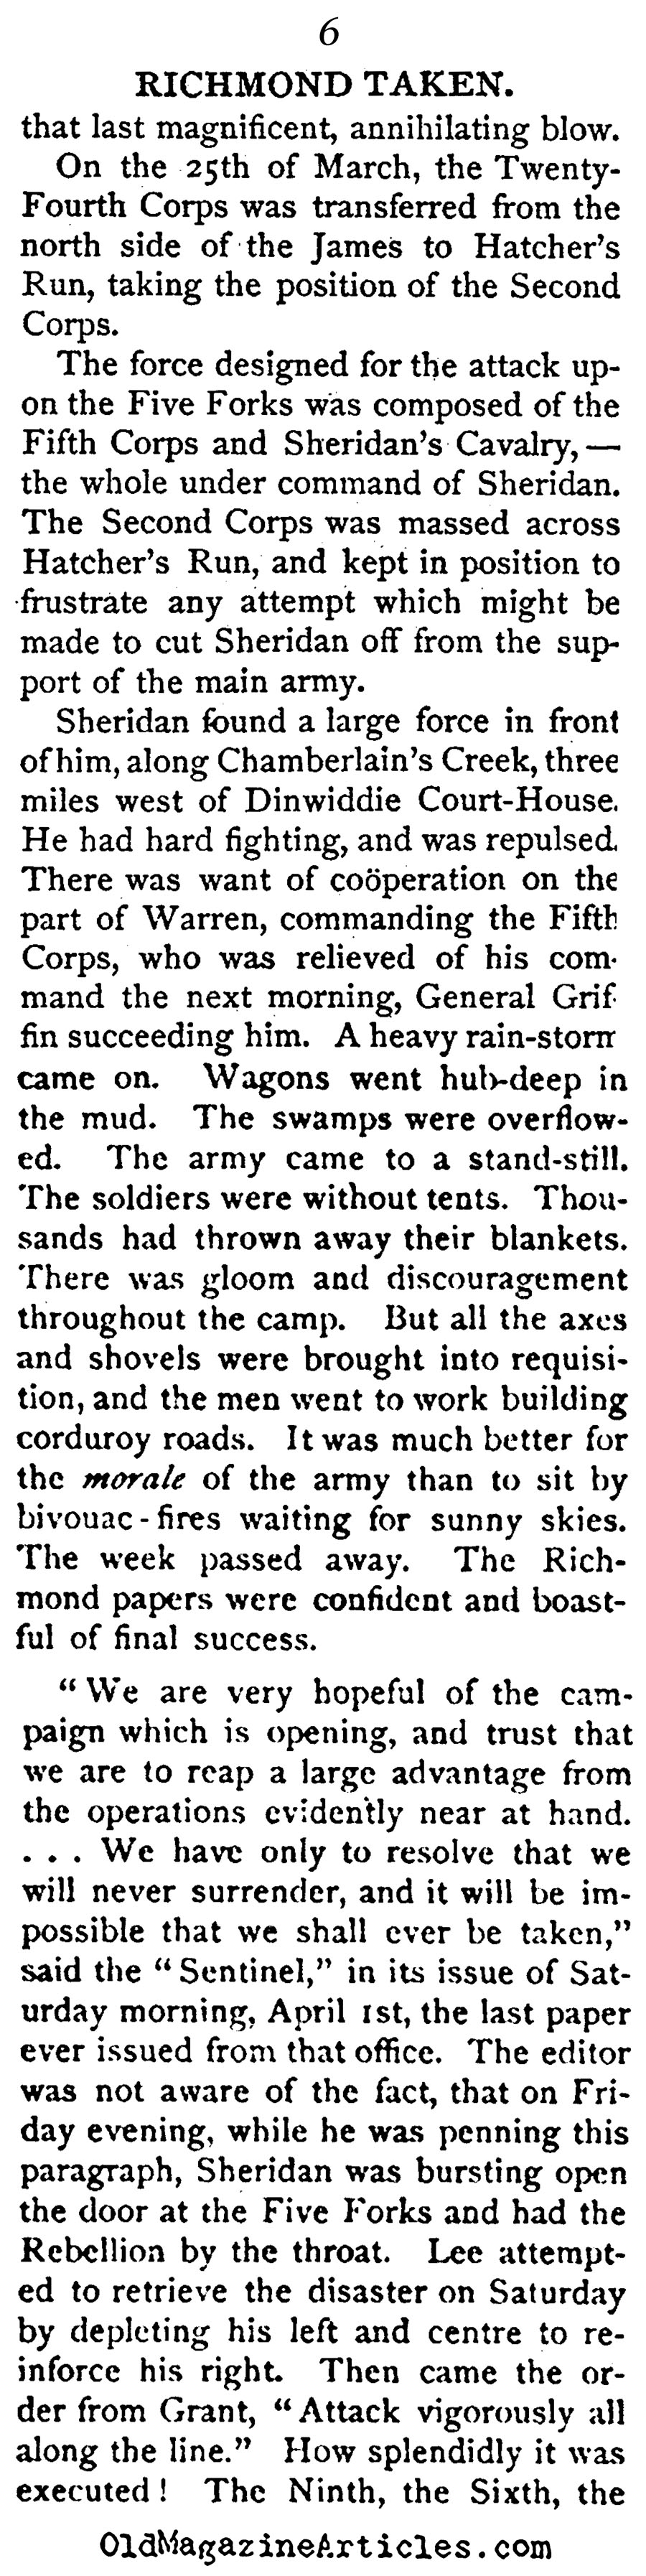  General Grant's March on Richmond (The Atlantic Monthly, 1865)